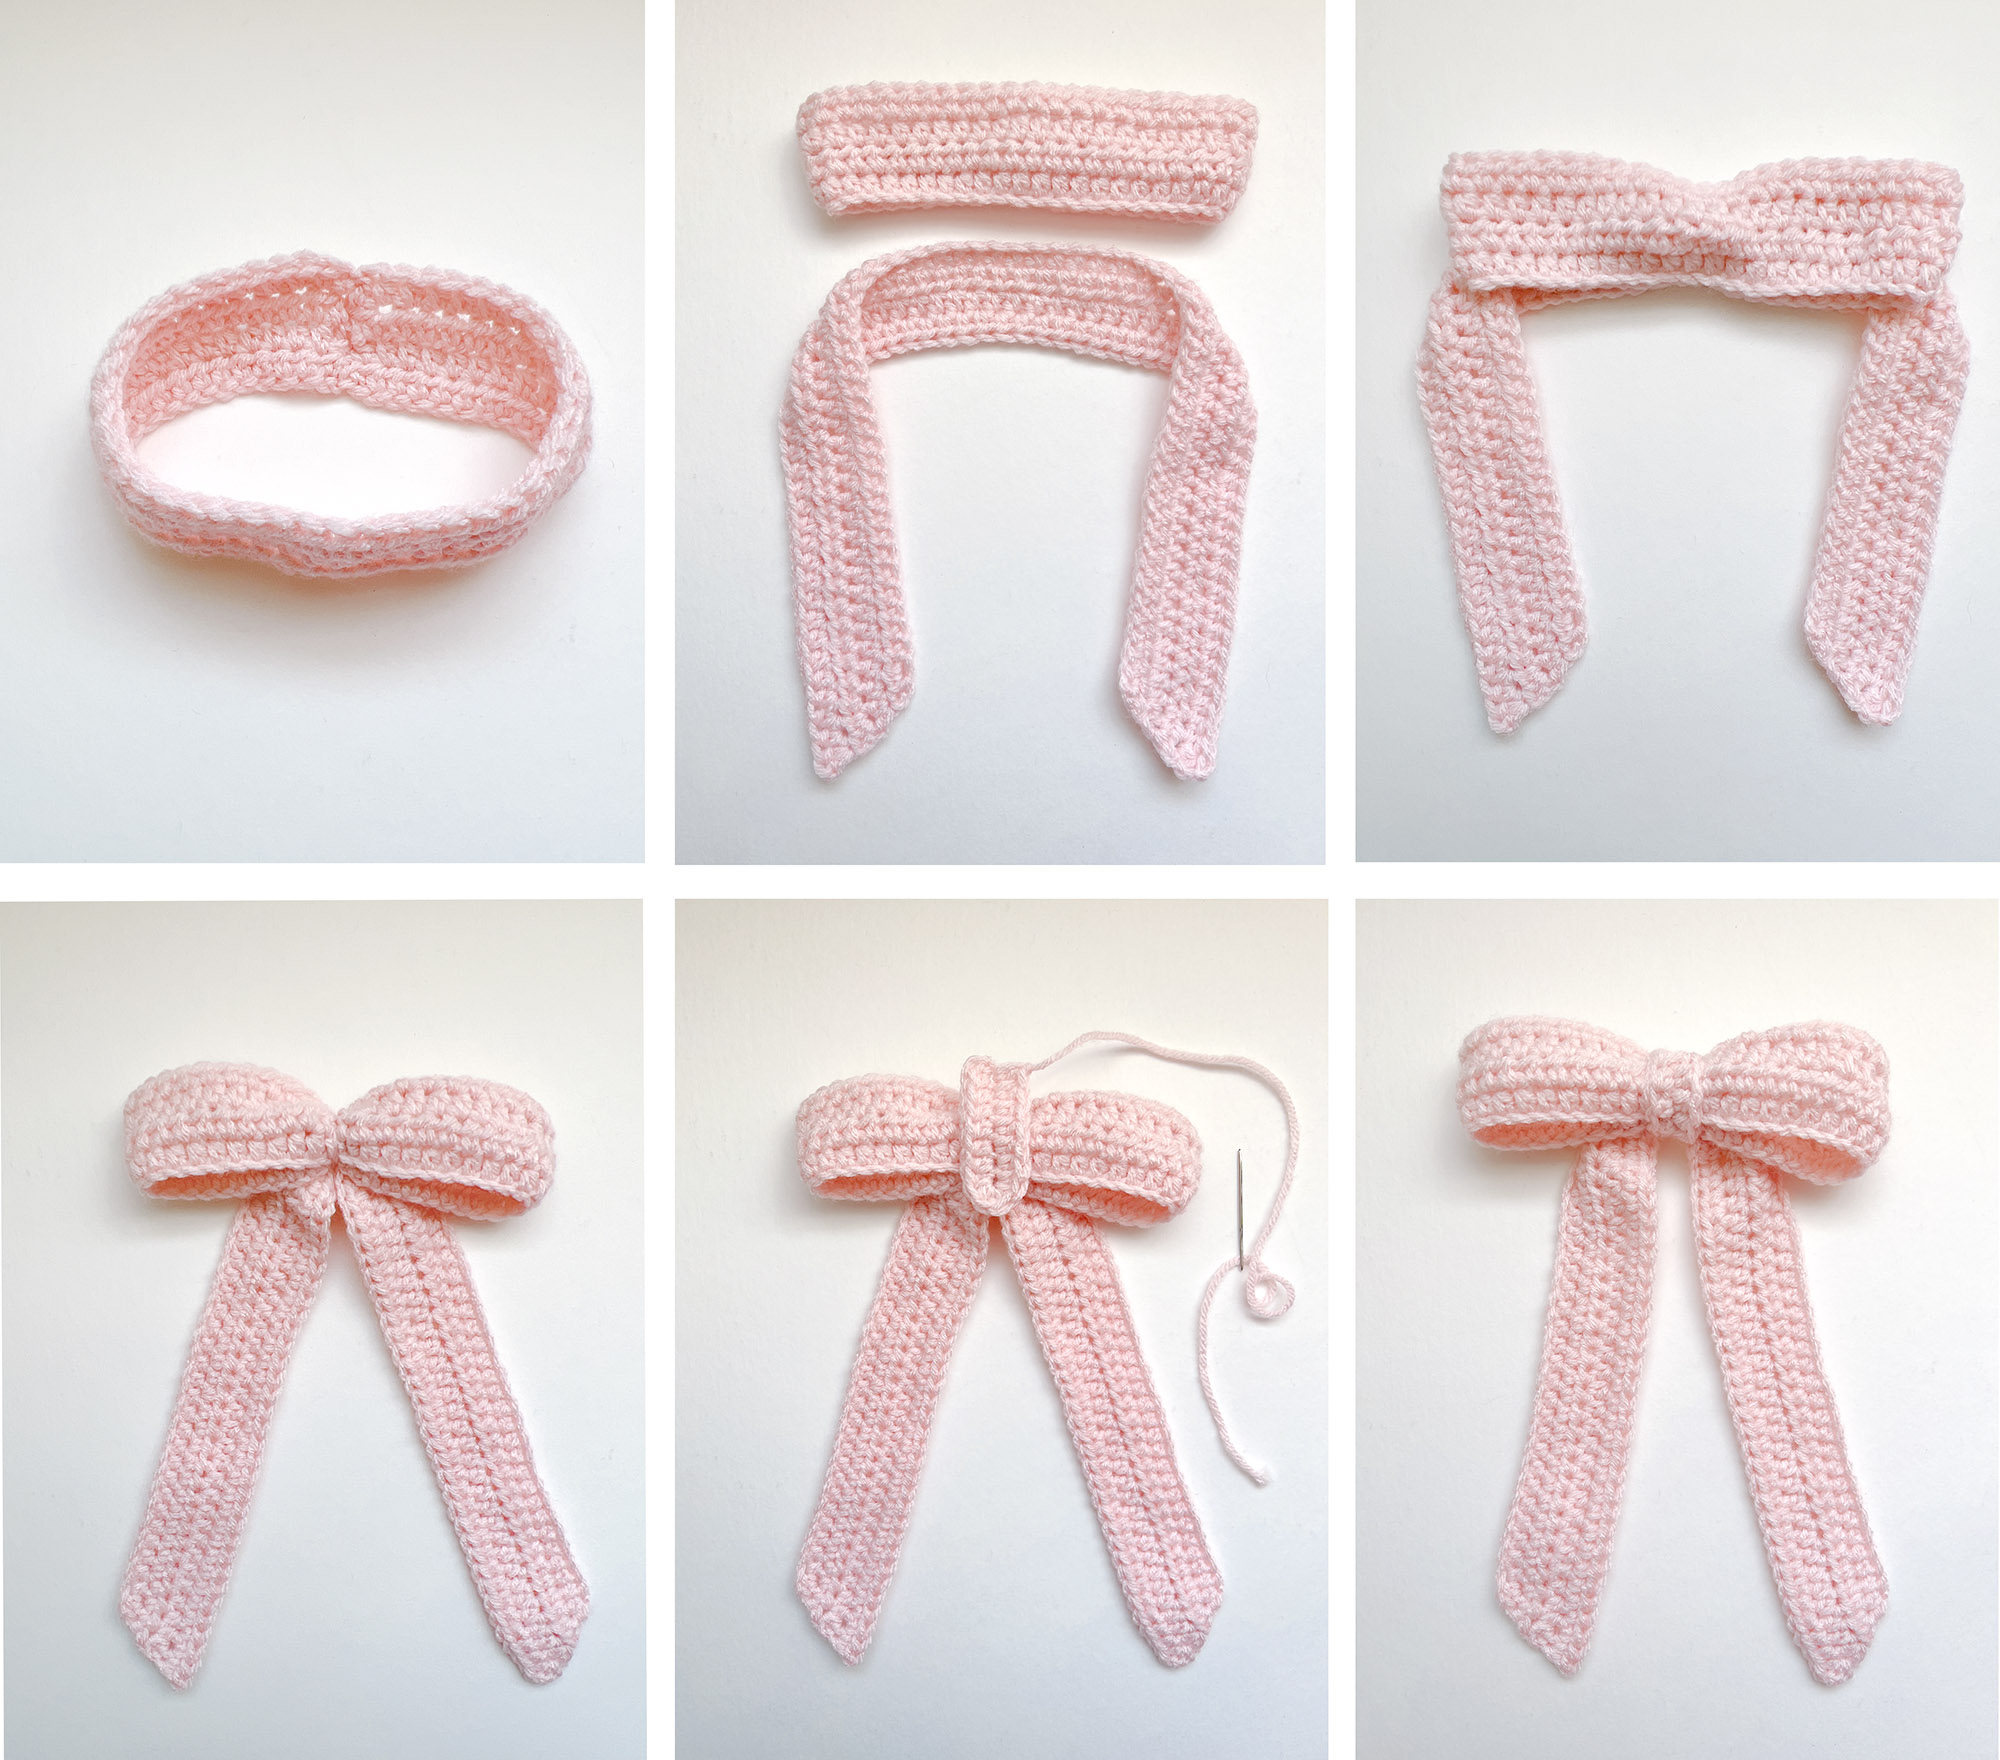 image of 6 step to assemble 3 pink crocheted strips into a bow